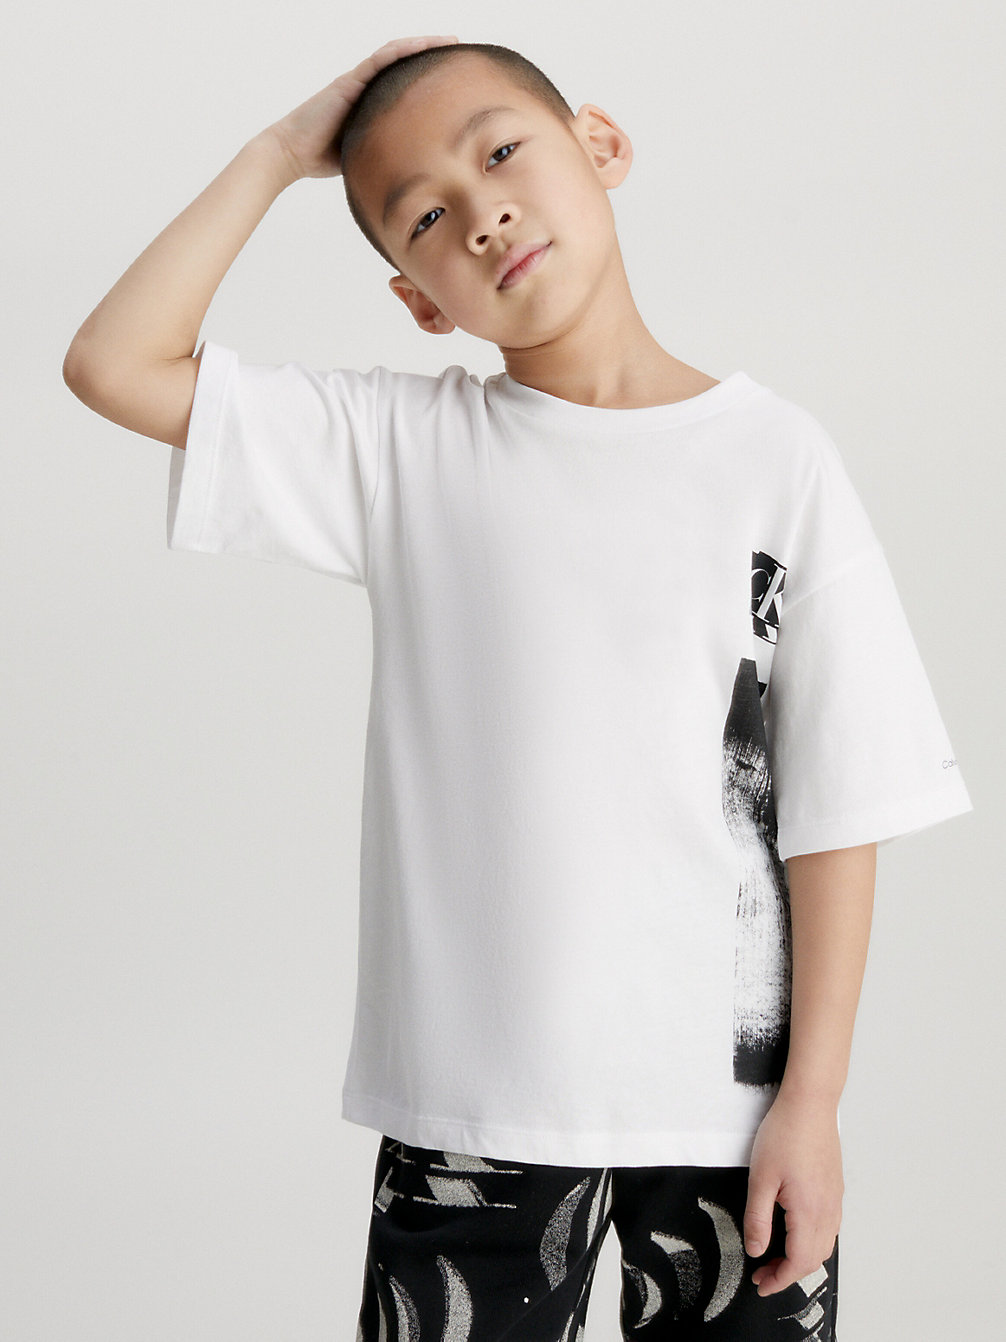 BRIGHT WHITE Relaxed Glitch Graphic T-Shirt undefined boys Calvin Klein